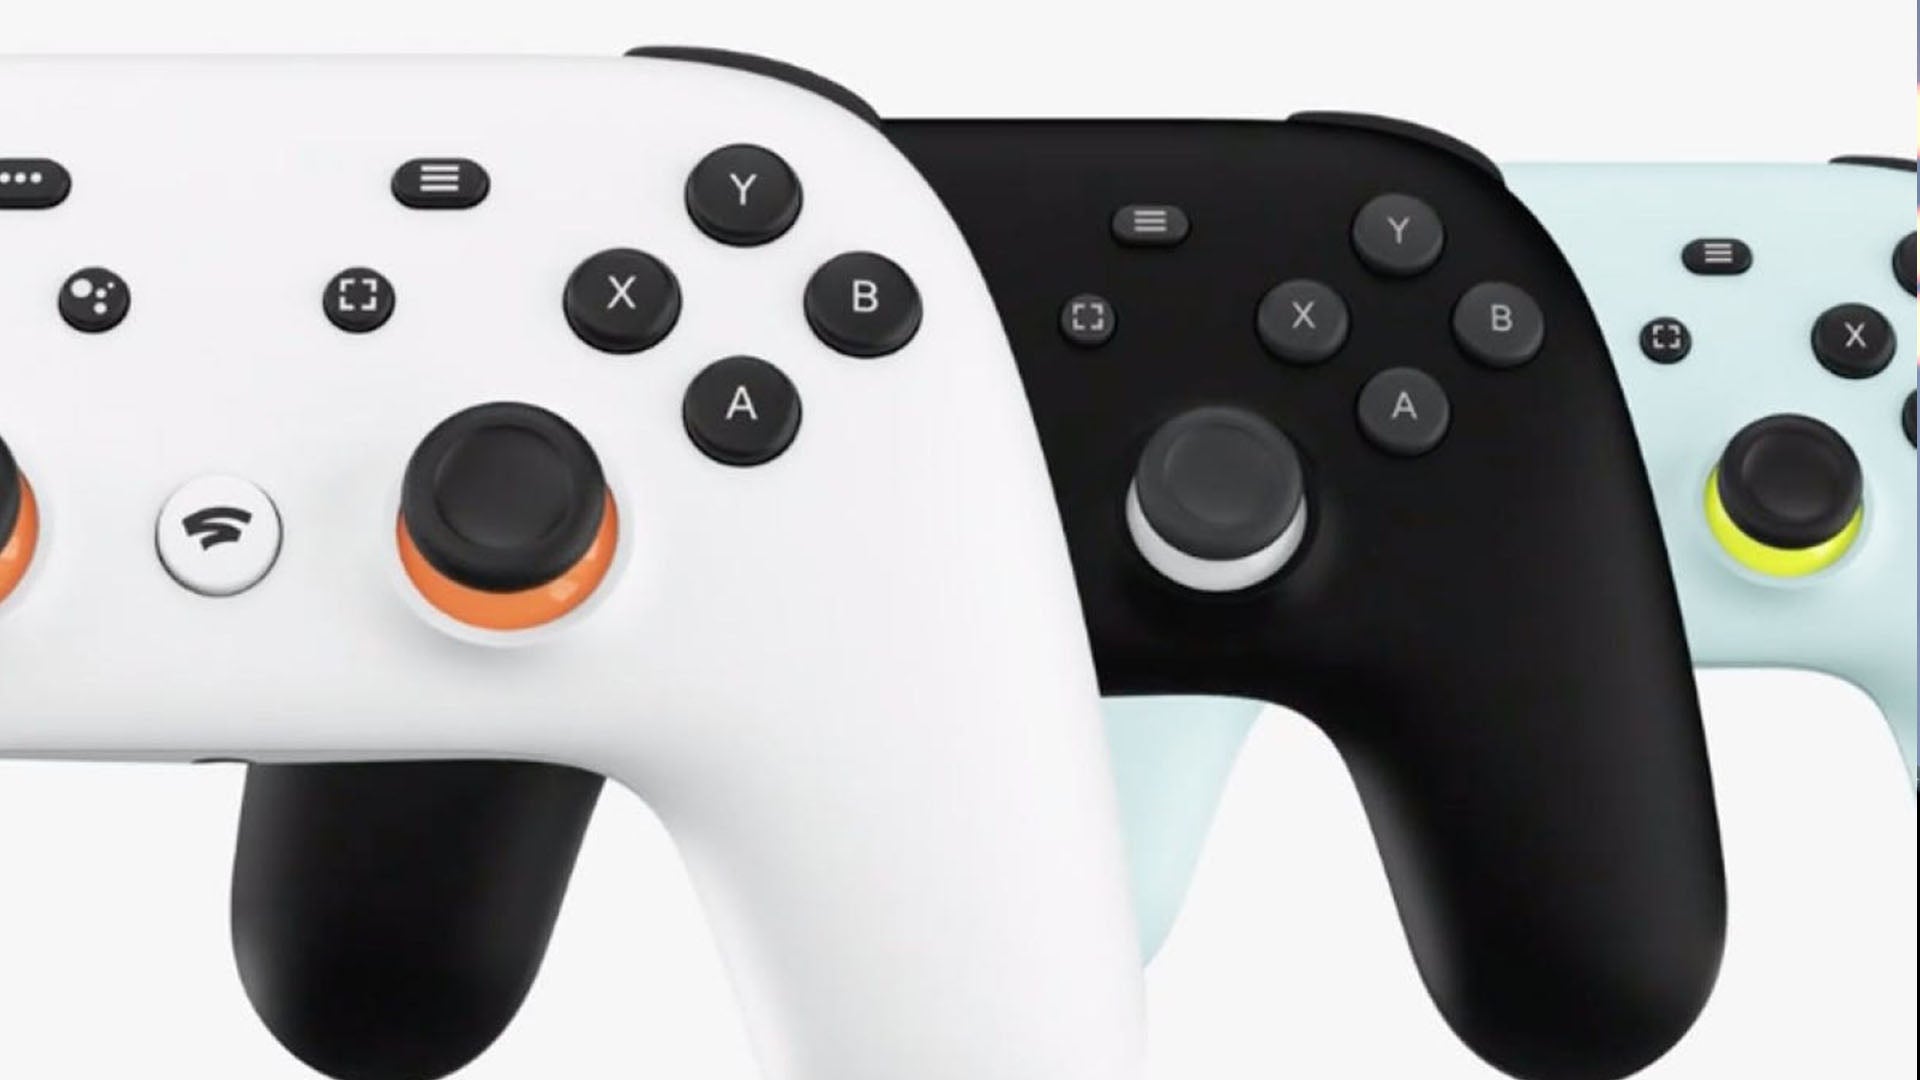 Image for Google Stadia Review: 4K Image Quality Analysis, Latency Tests. Is This Really The Future Of Gaming?